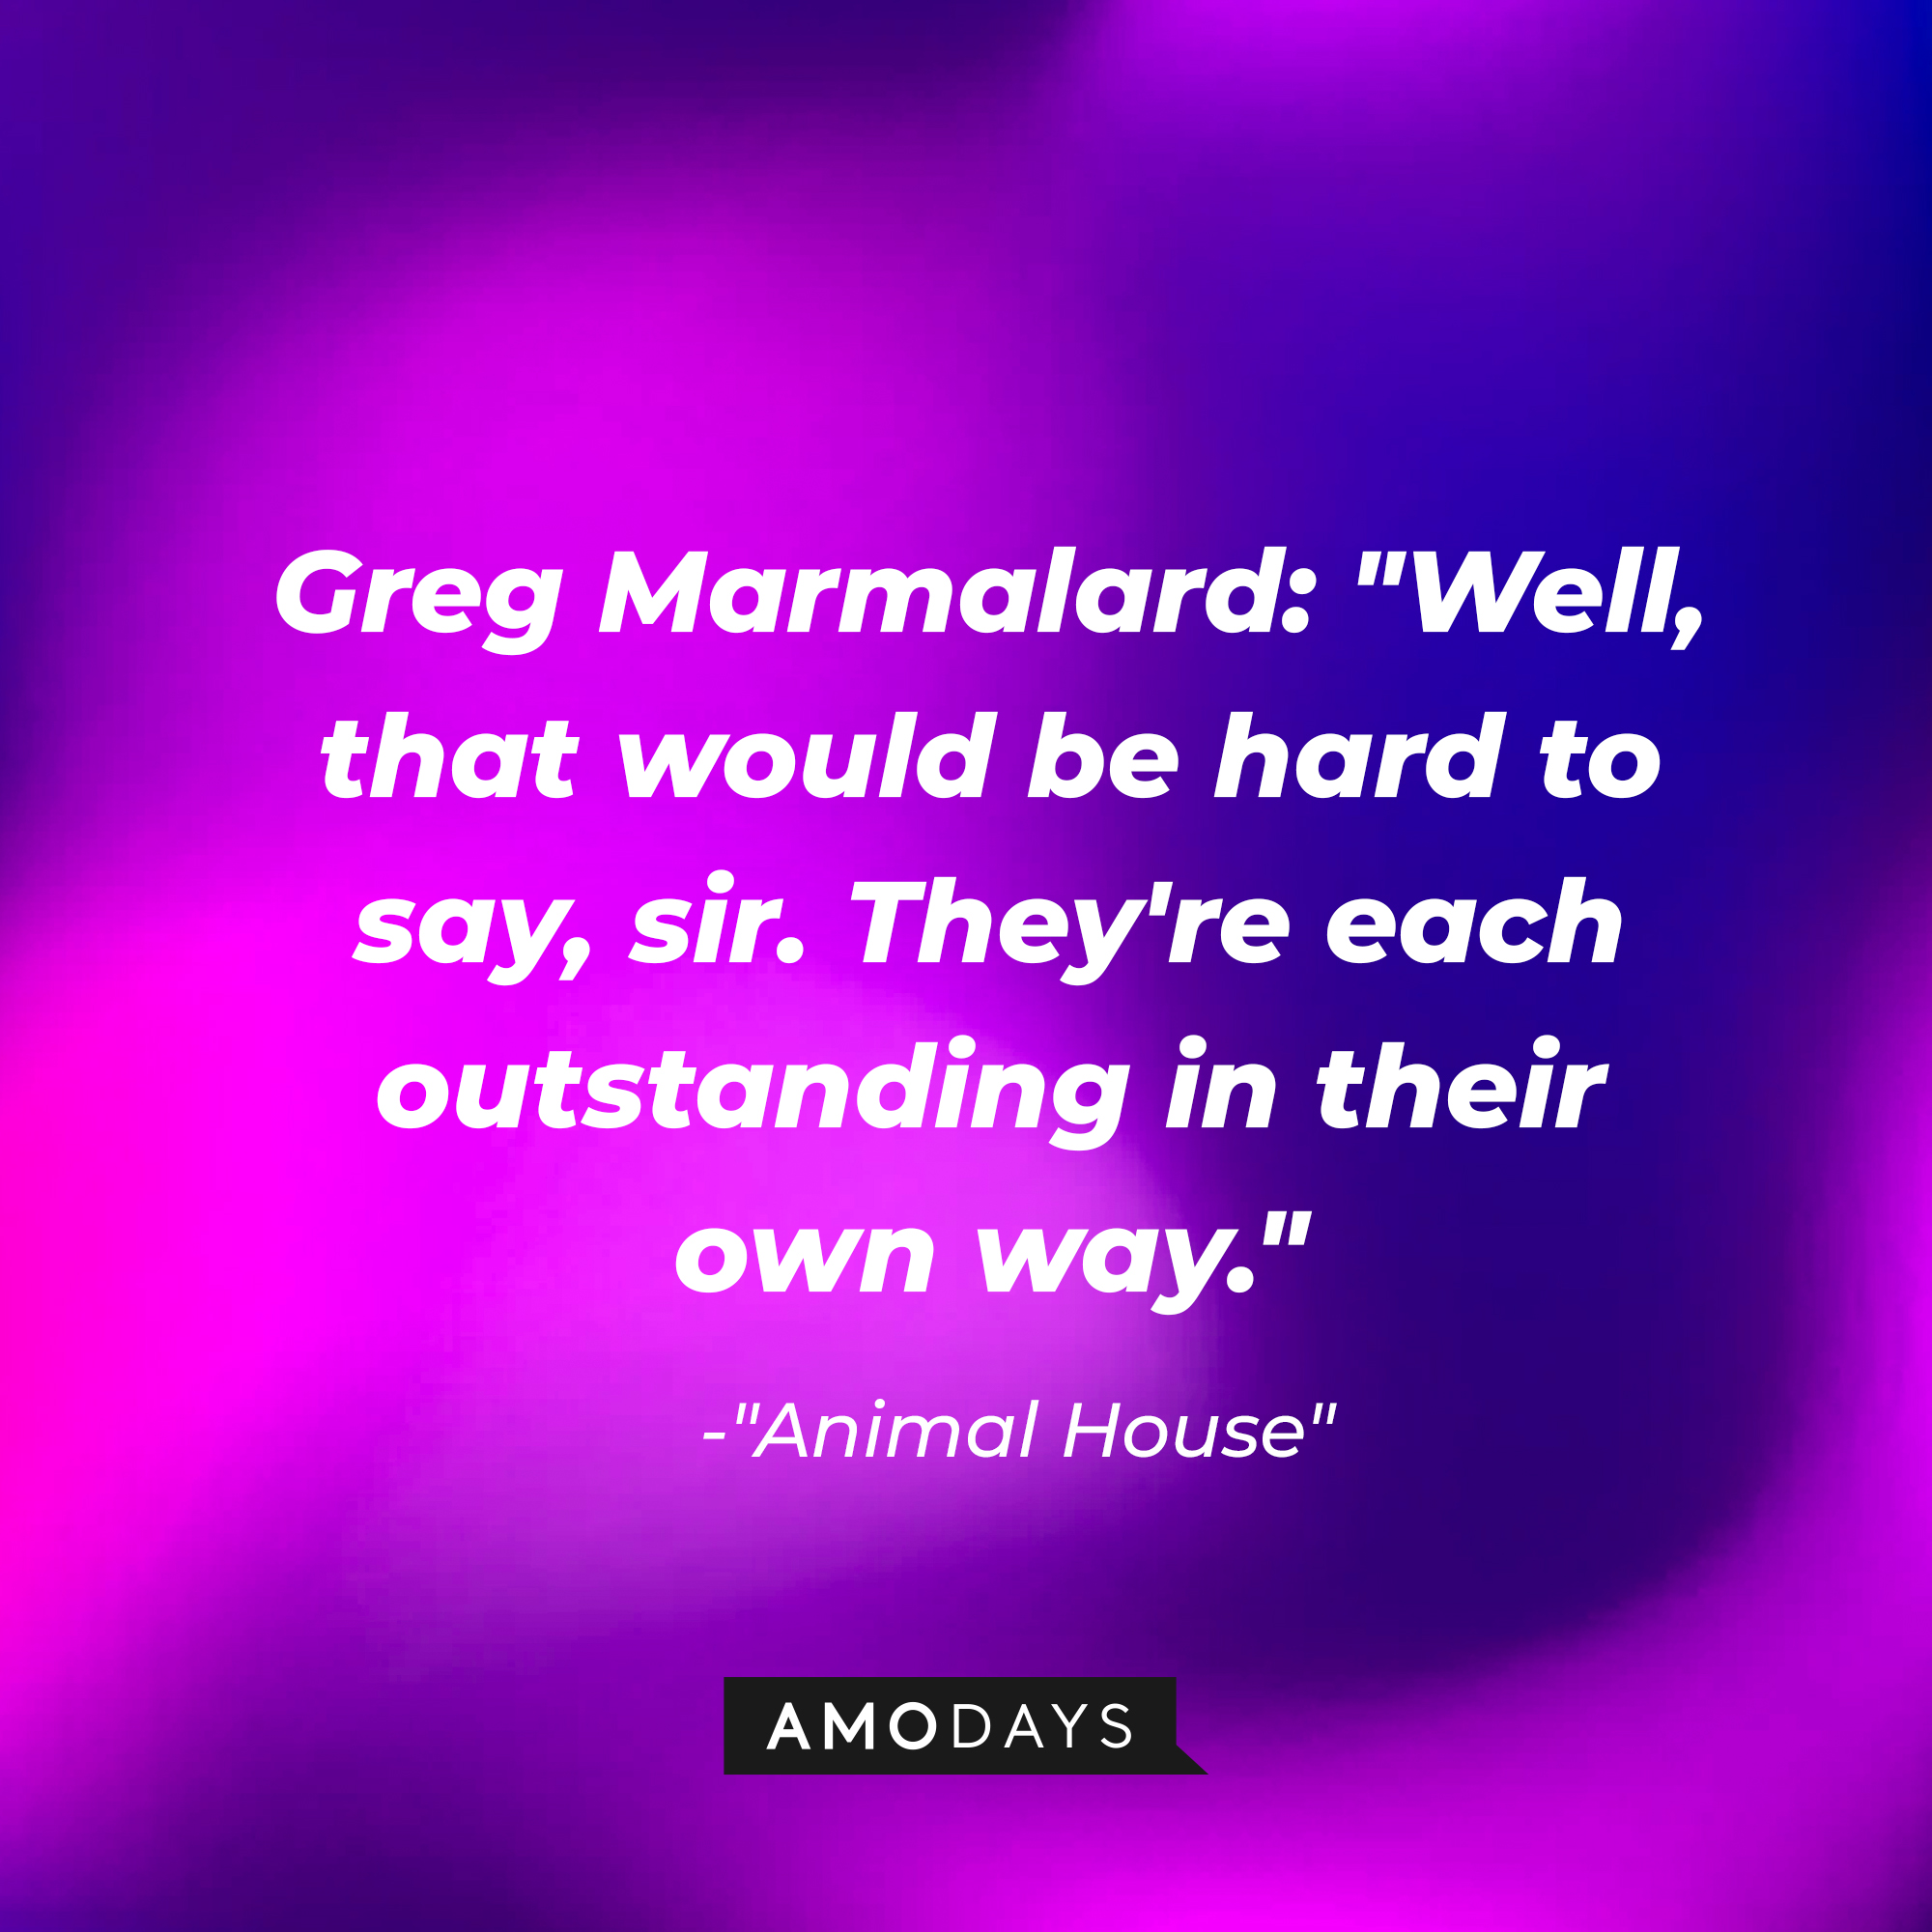 Greg Marmalard's quote: "Well, that would be hard to say, sir. They're each outstanding in their own way." | Source: Amodays